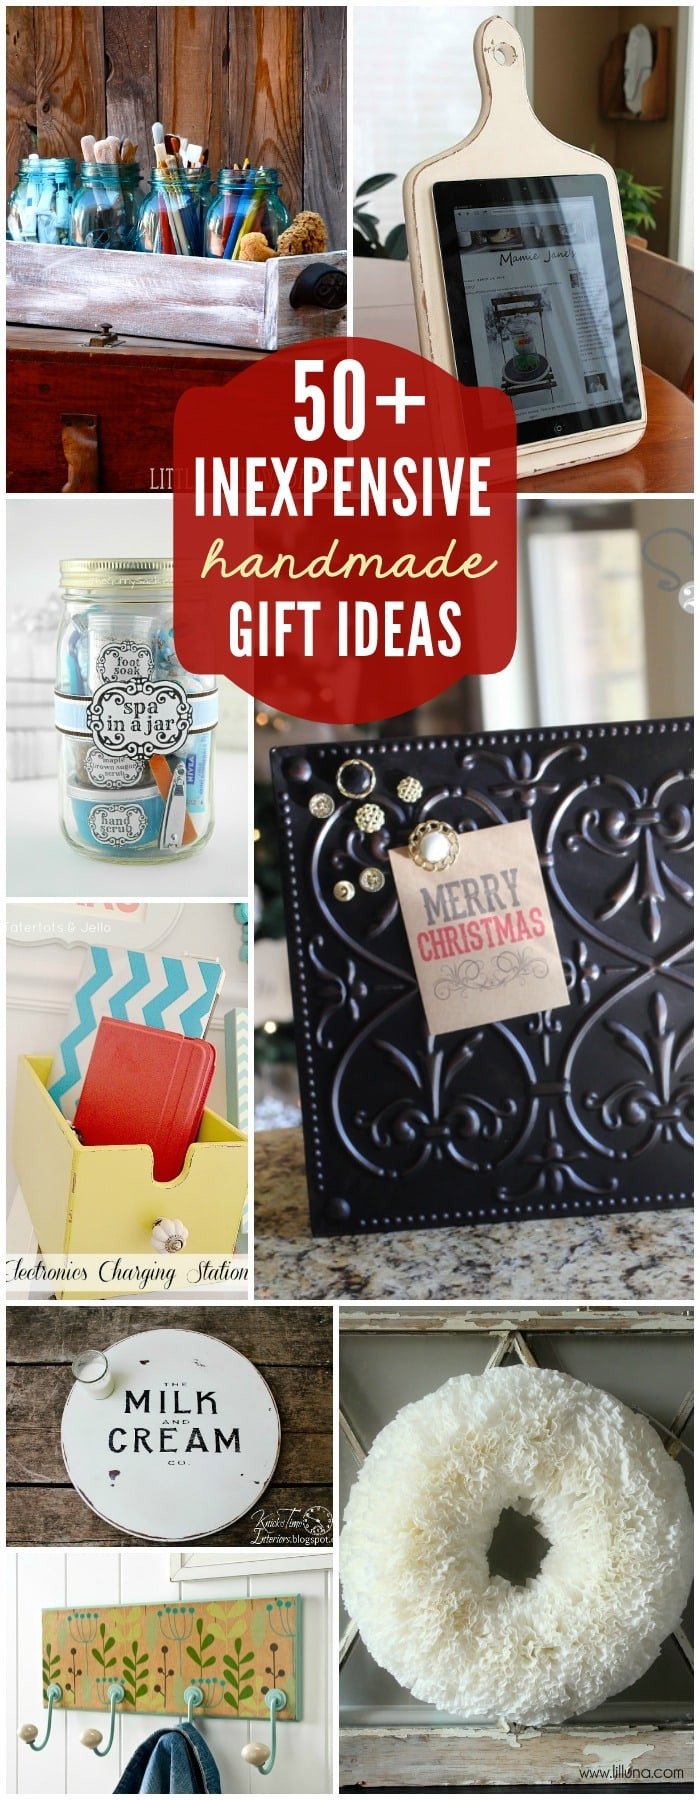 Best Holiday Gift Ideas
 Easy DIY Gift Ideas